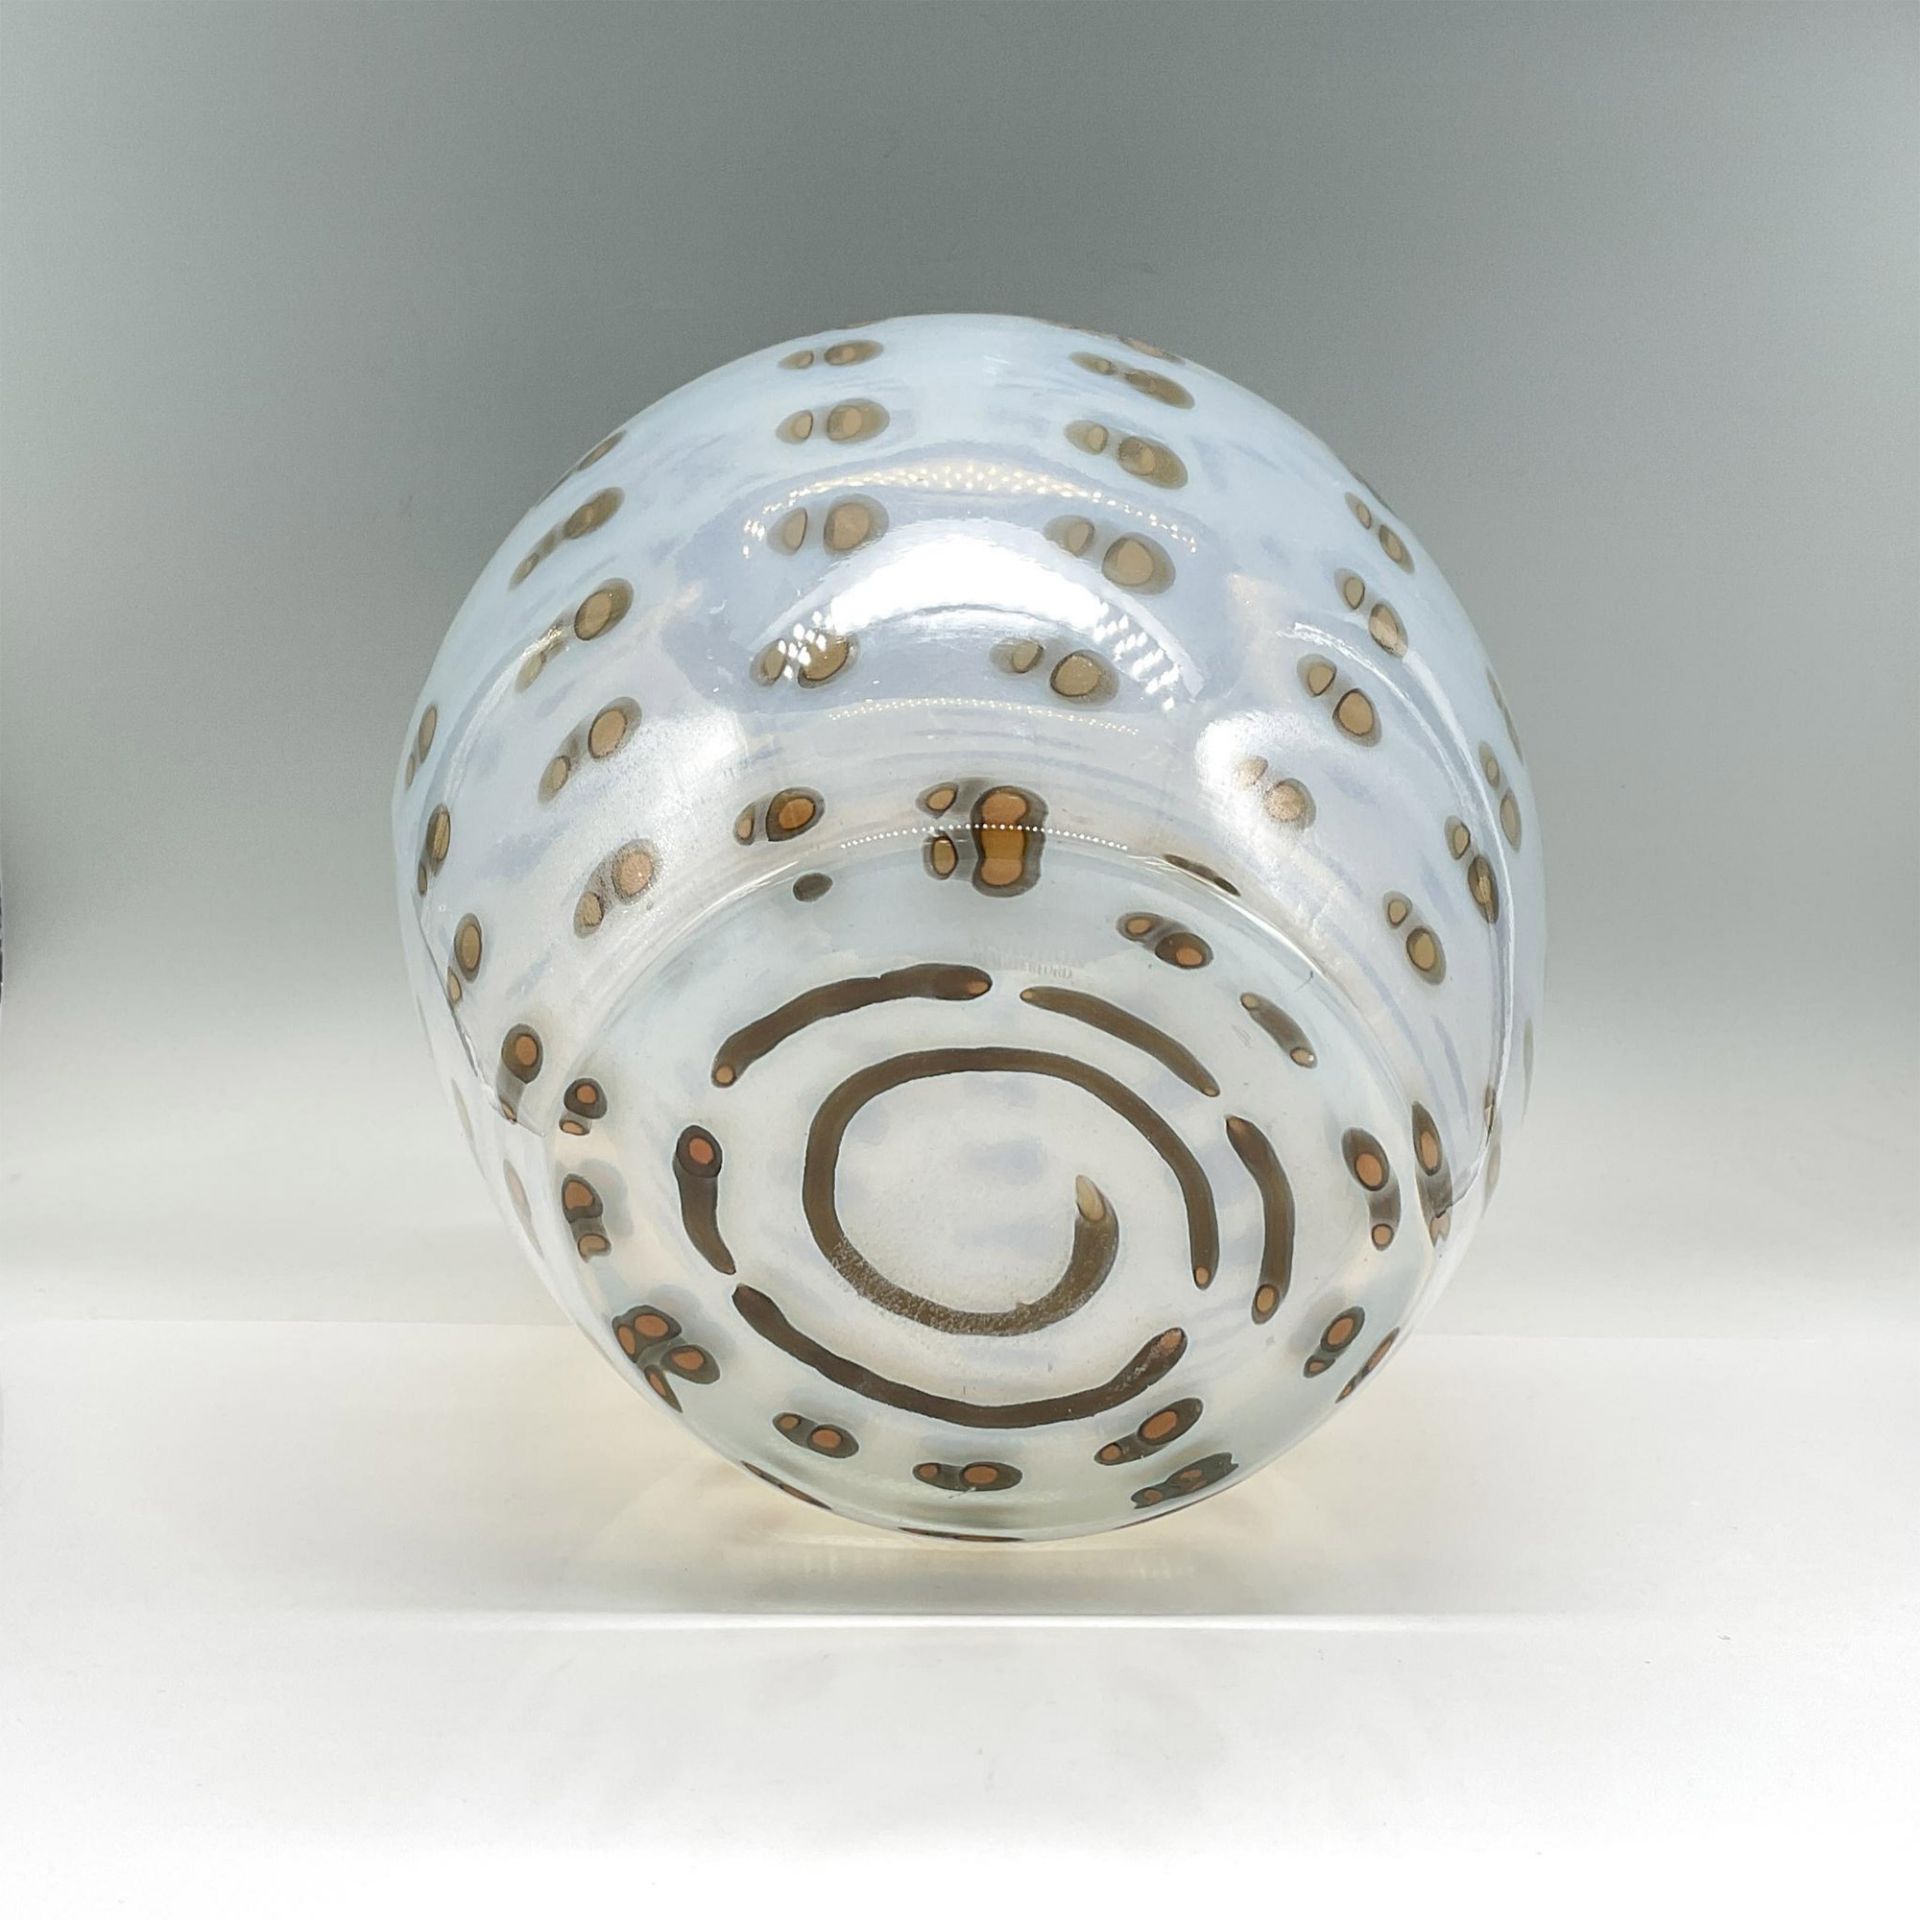 Waterford Evolution Crystal Vase, Bamboo Pattern - Image 3 of 3